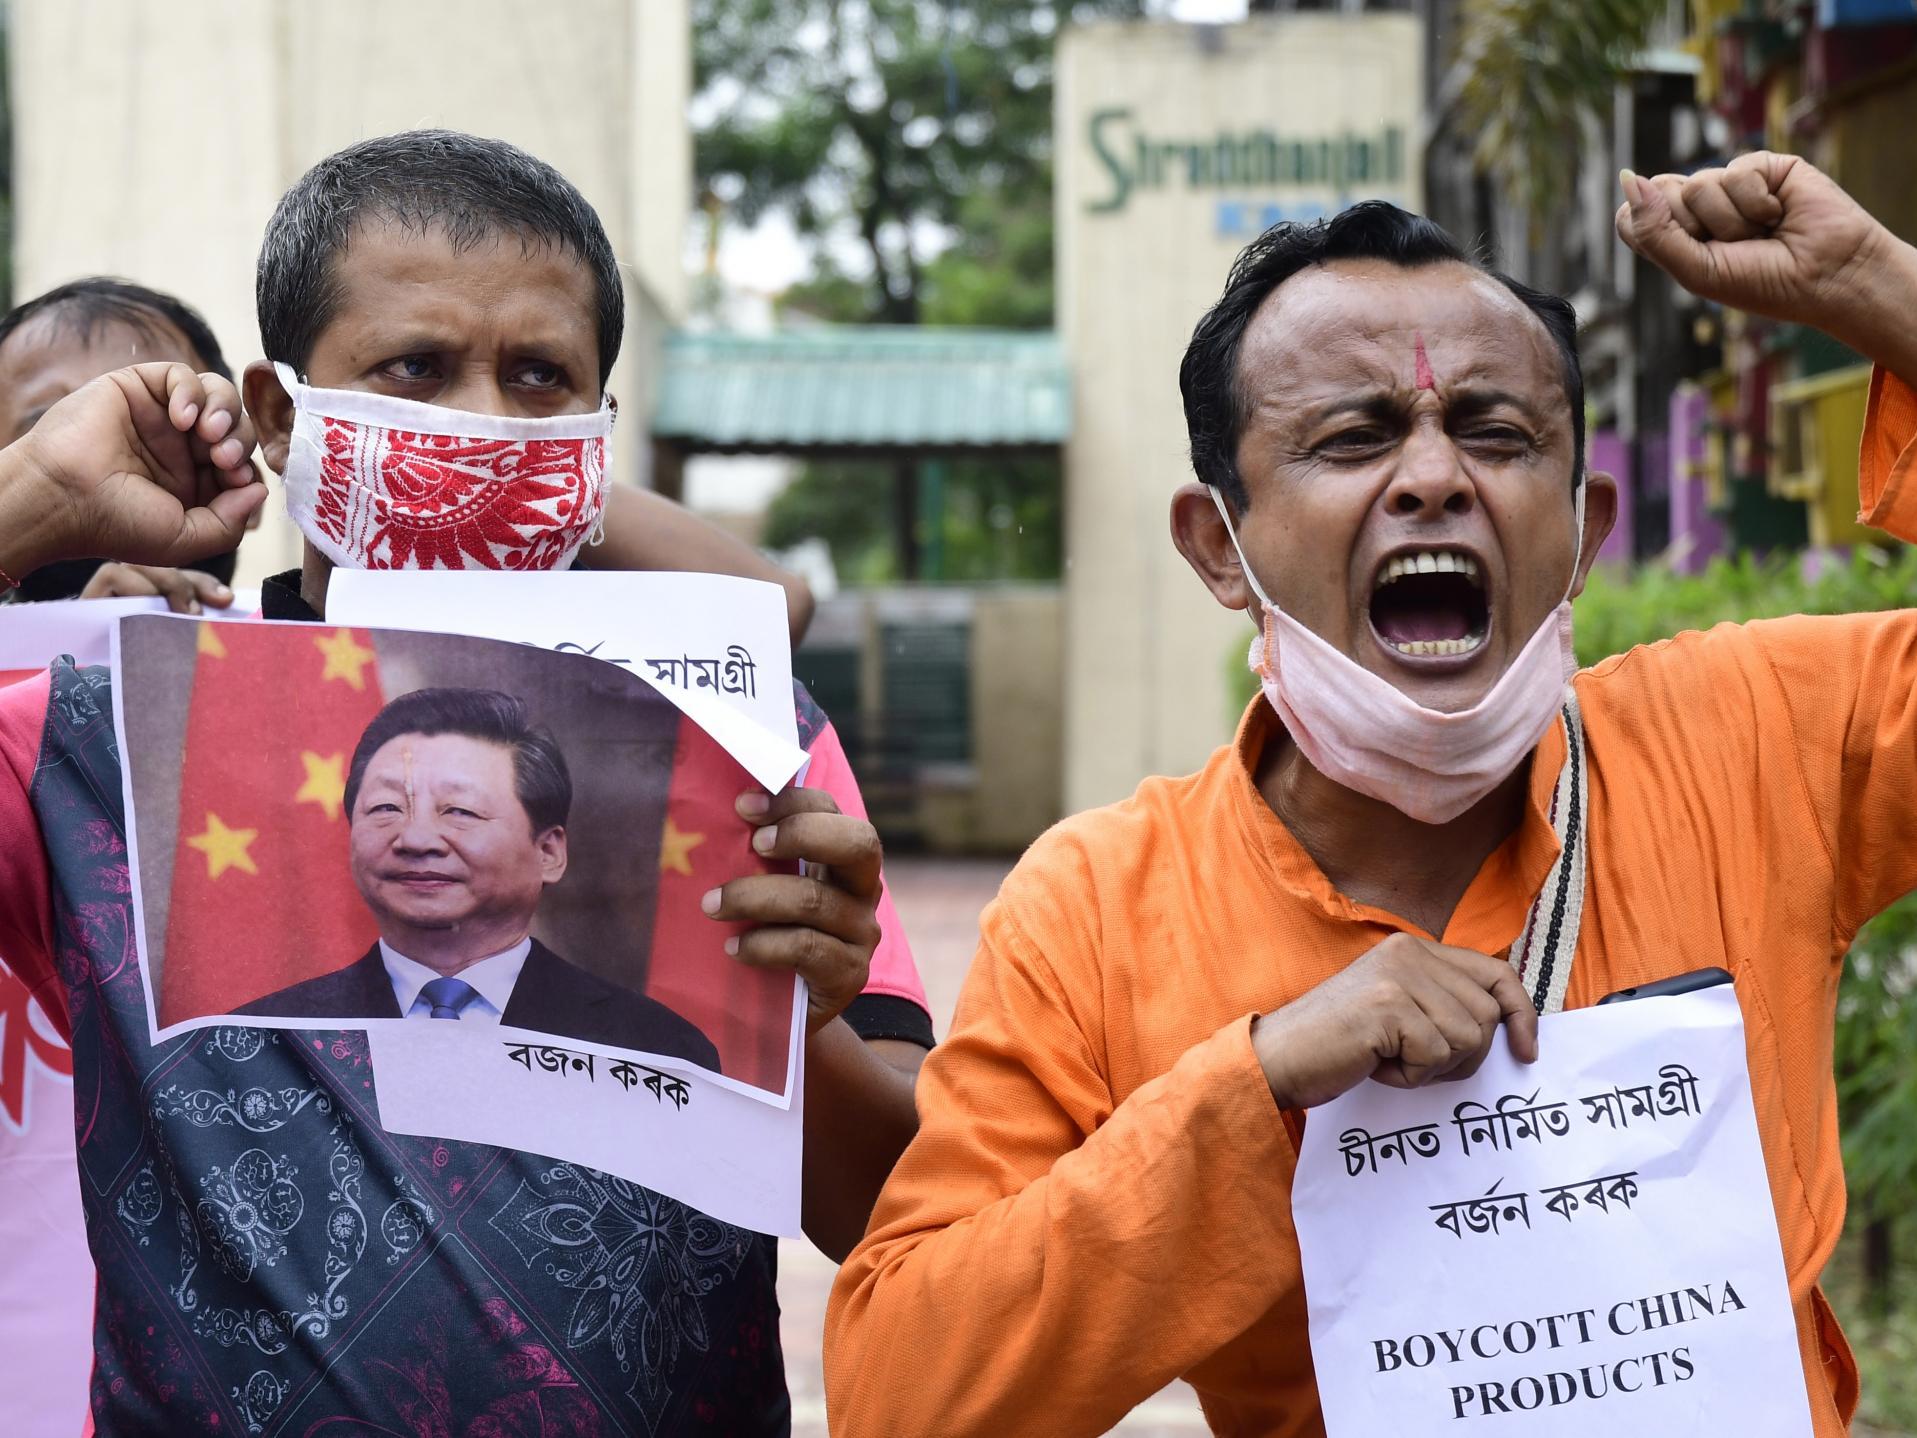 Indian activists shout slogans against China's president, Xi Jinping, during a protest in Guwahati, Assam, India